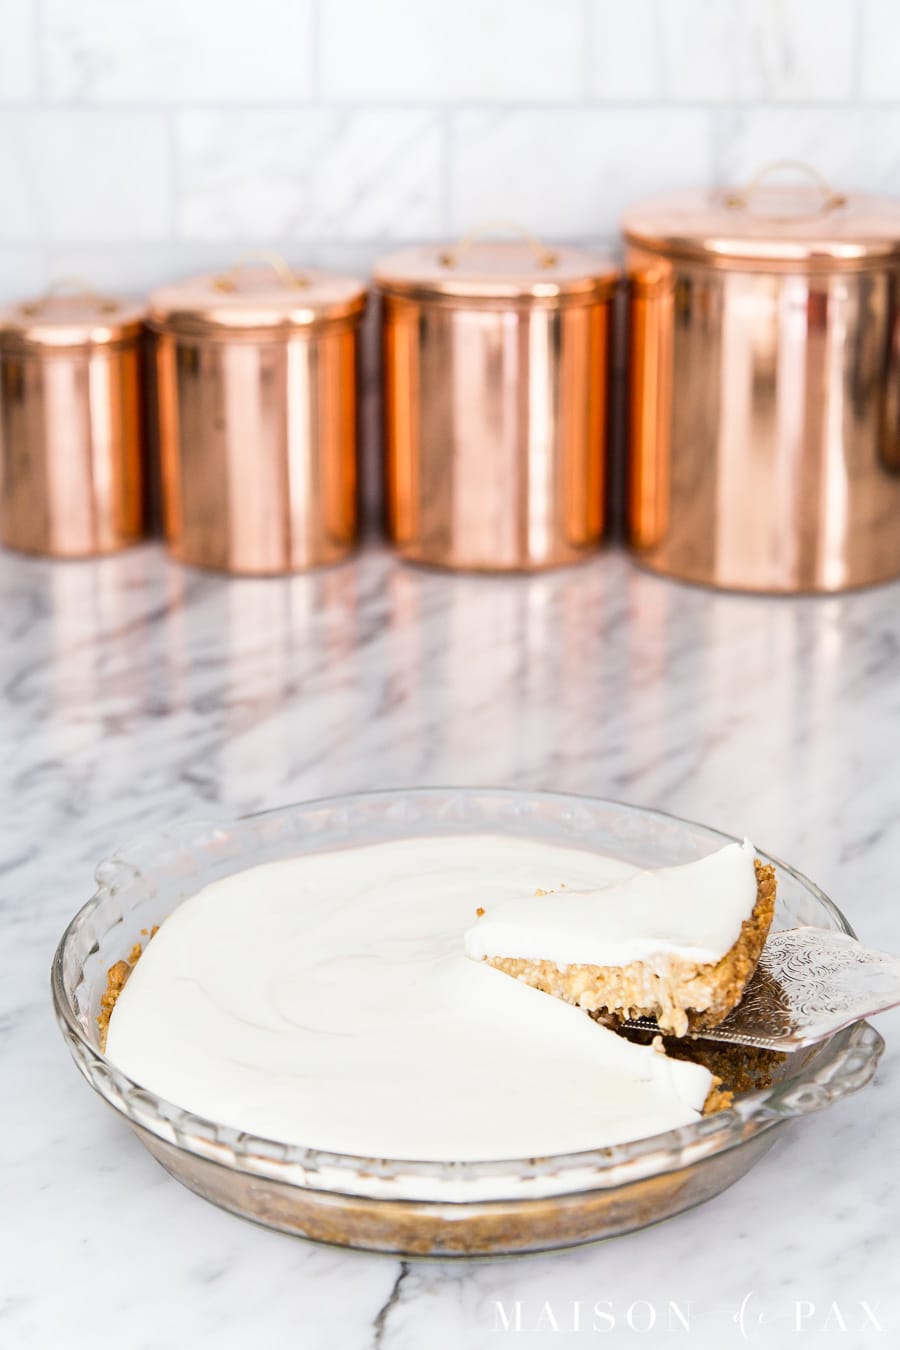 pumpkin cheesecake with sour cream topping in glass pie pan | Maison de Pax